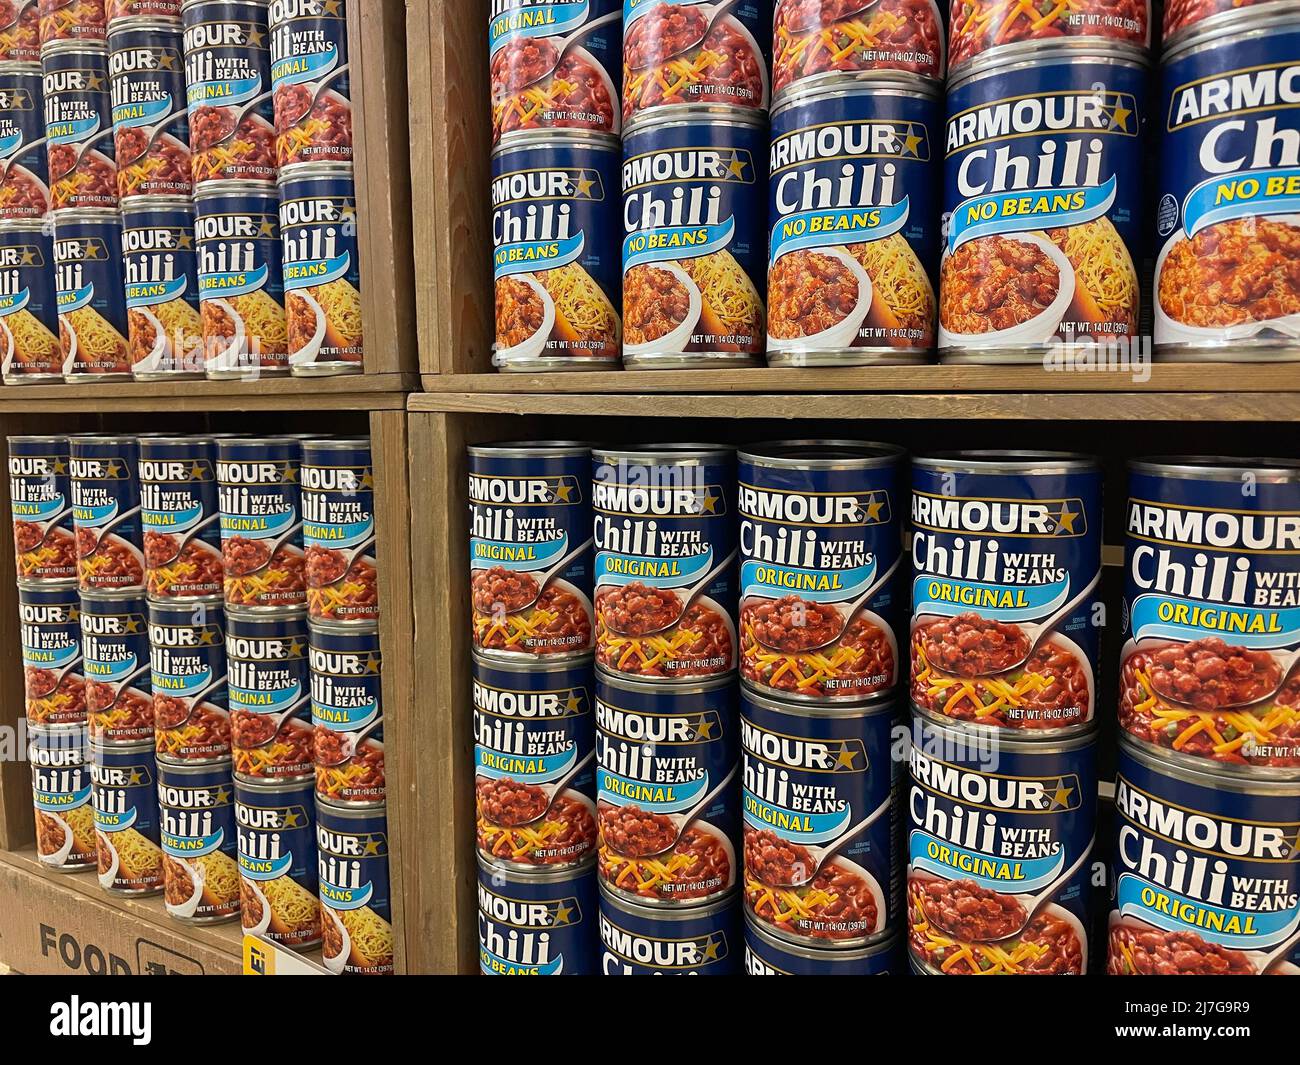 Augusta, Ga USA - 04 27 22: Armour can chili display in a retail store side view Stock Photo